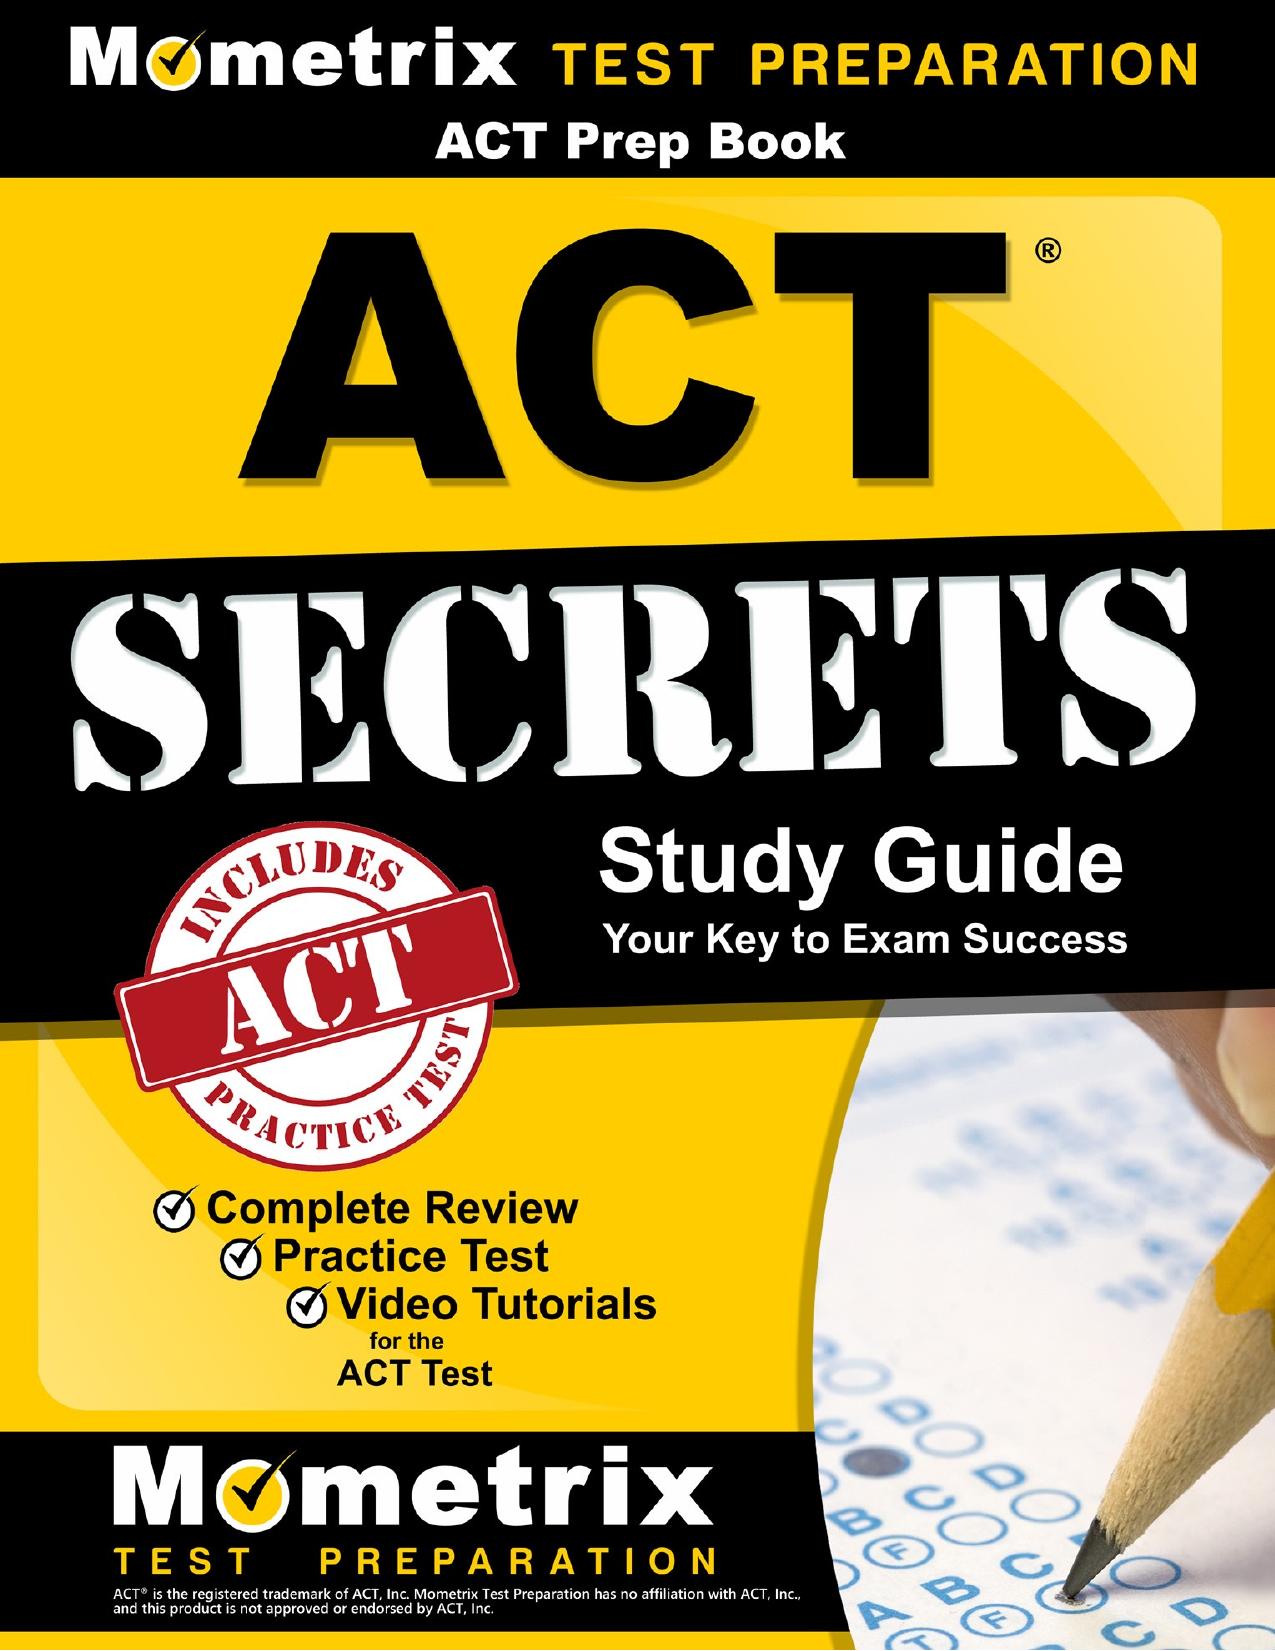 ACT Prep Book ACT Secrets Study Guide Complete Review, Practice Test